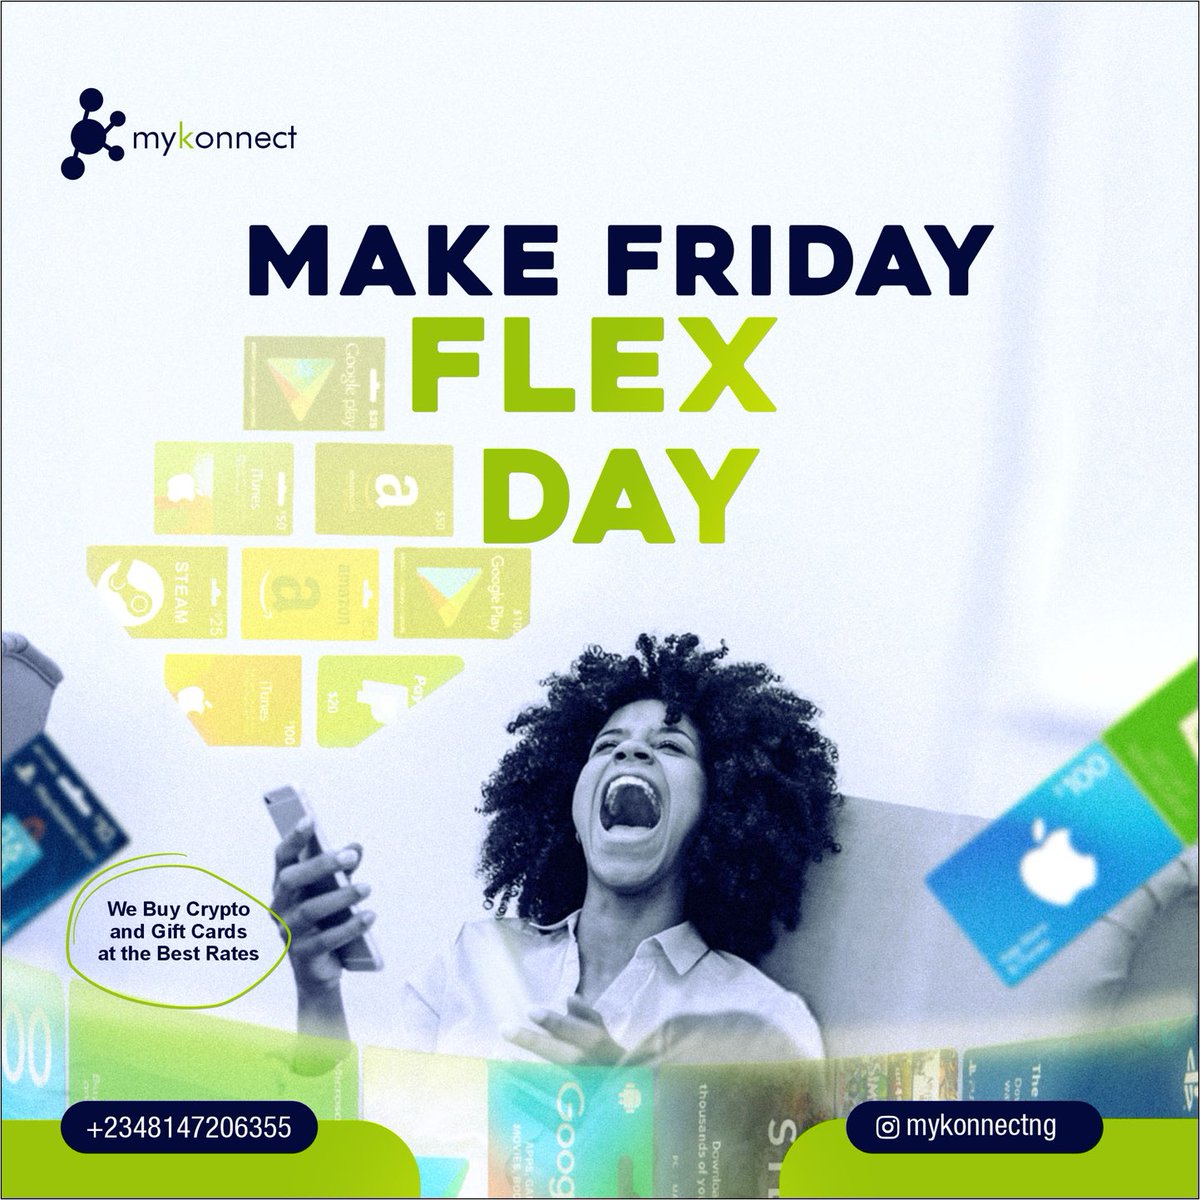 Your #TGIF doesn’t have to be audio flex - trade your crypto and giftcards and get cash to fund your needs!
DM us or visit our website to get ahead of the weekend. 
#MyKonnect #MyKonnectNG
#Crypto #Cryptocurrency #GiftCards 
#OnlineTrading #Trading #DayTrading #Deals